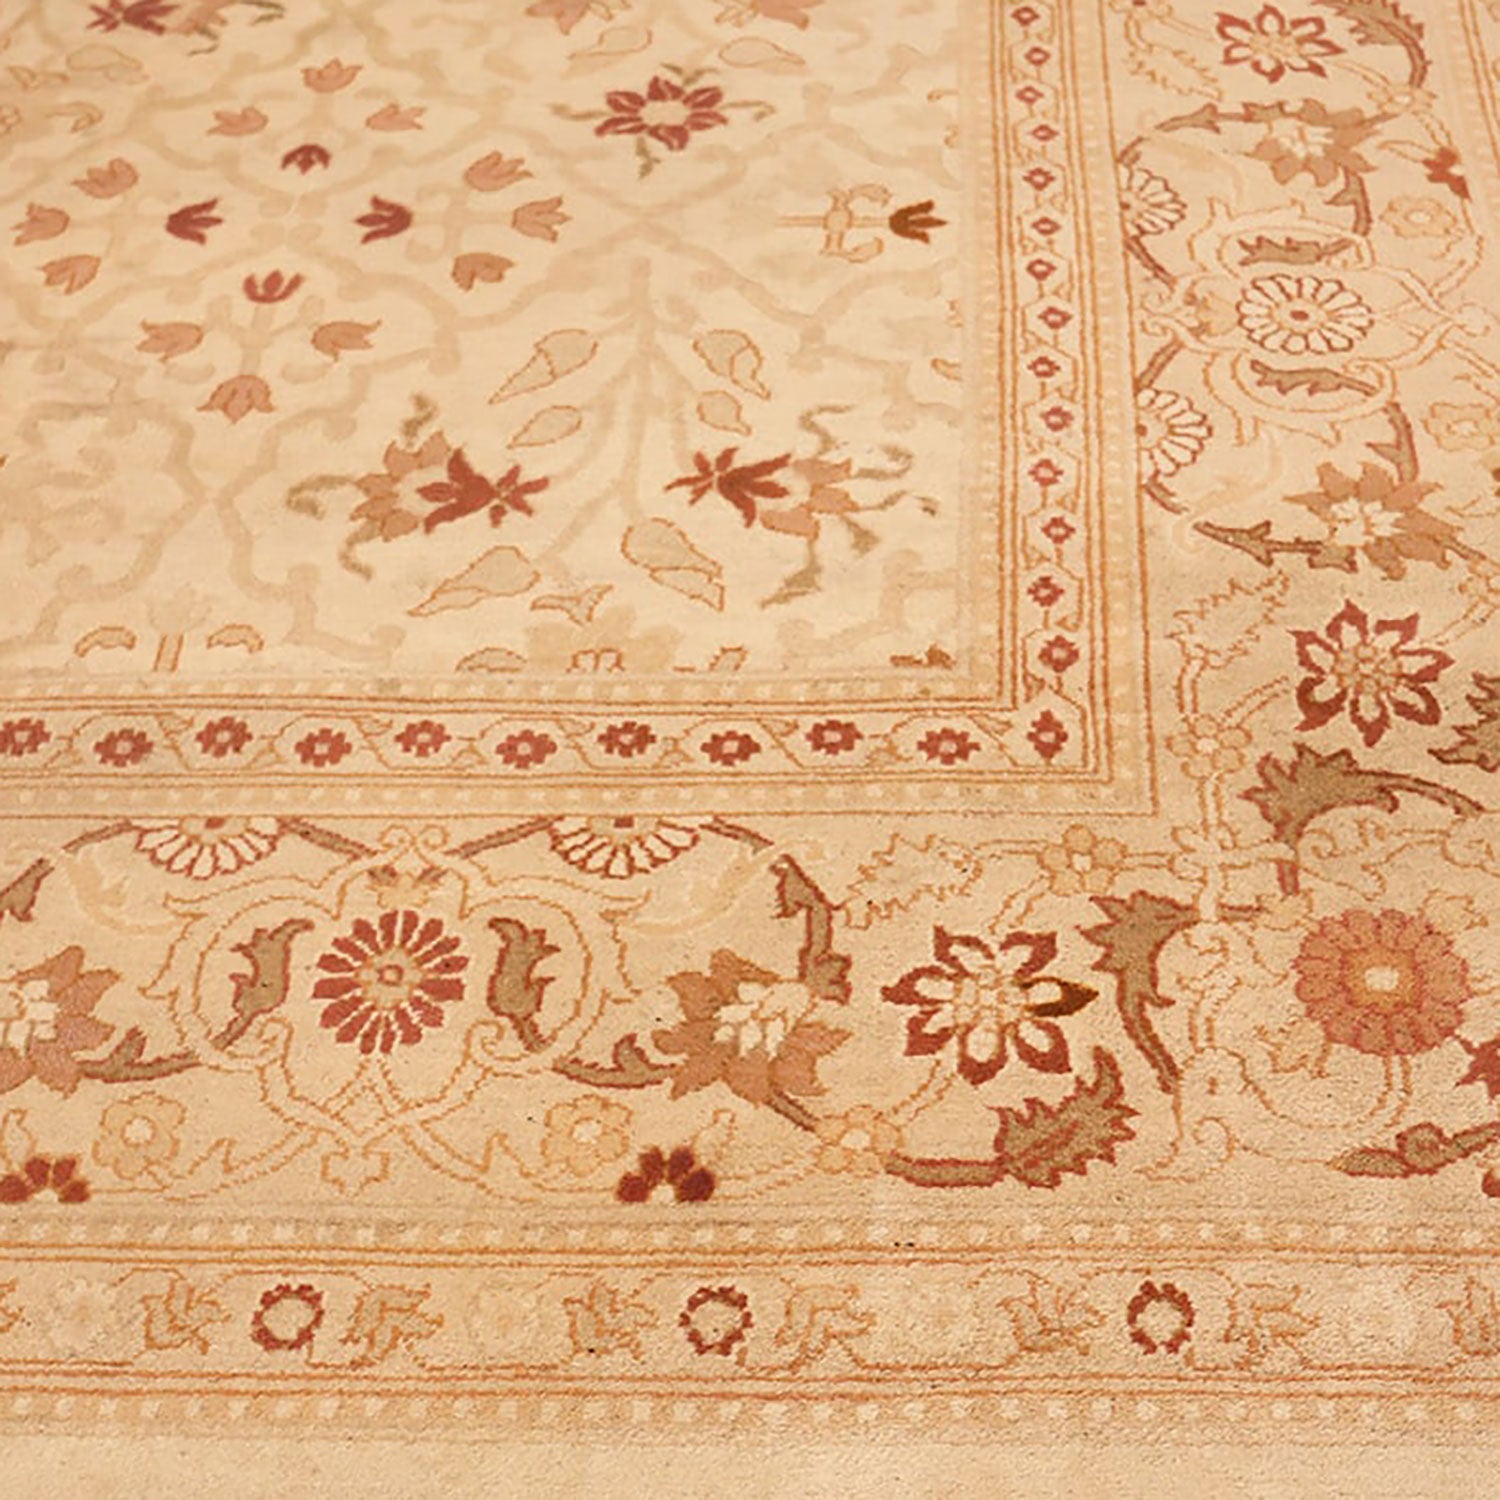 Intricately designed rug with floral and botanical patterns in earthy tones.